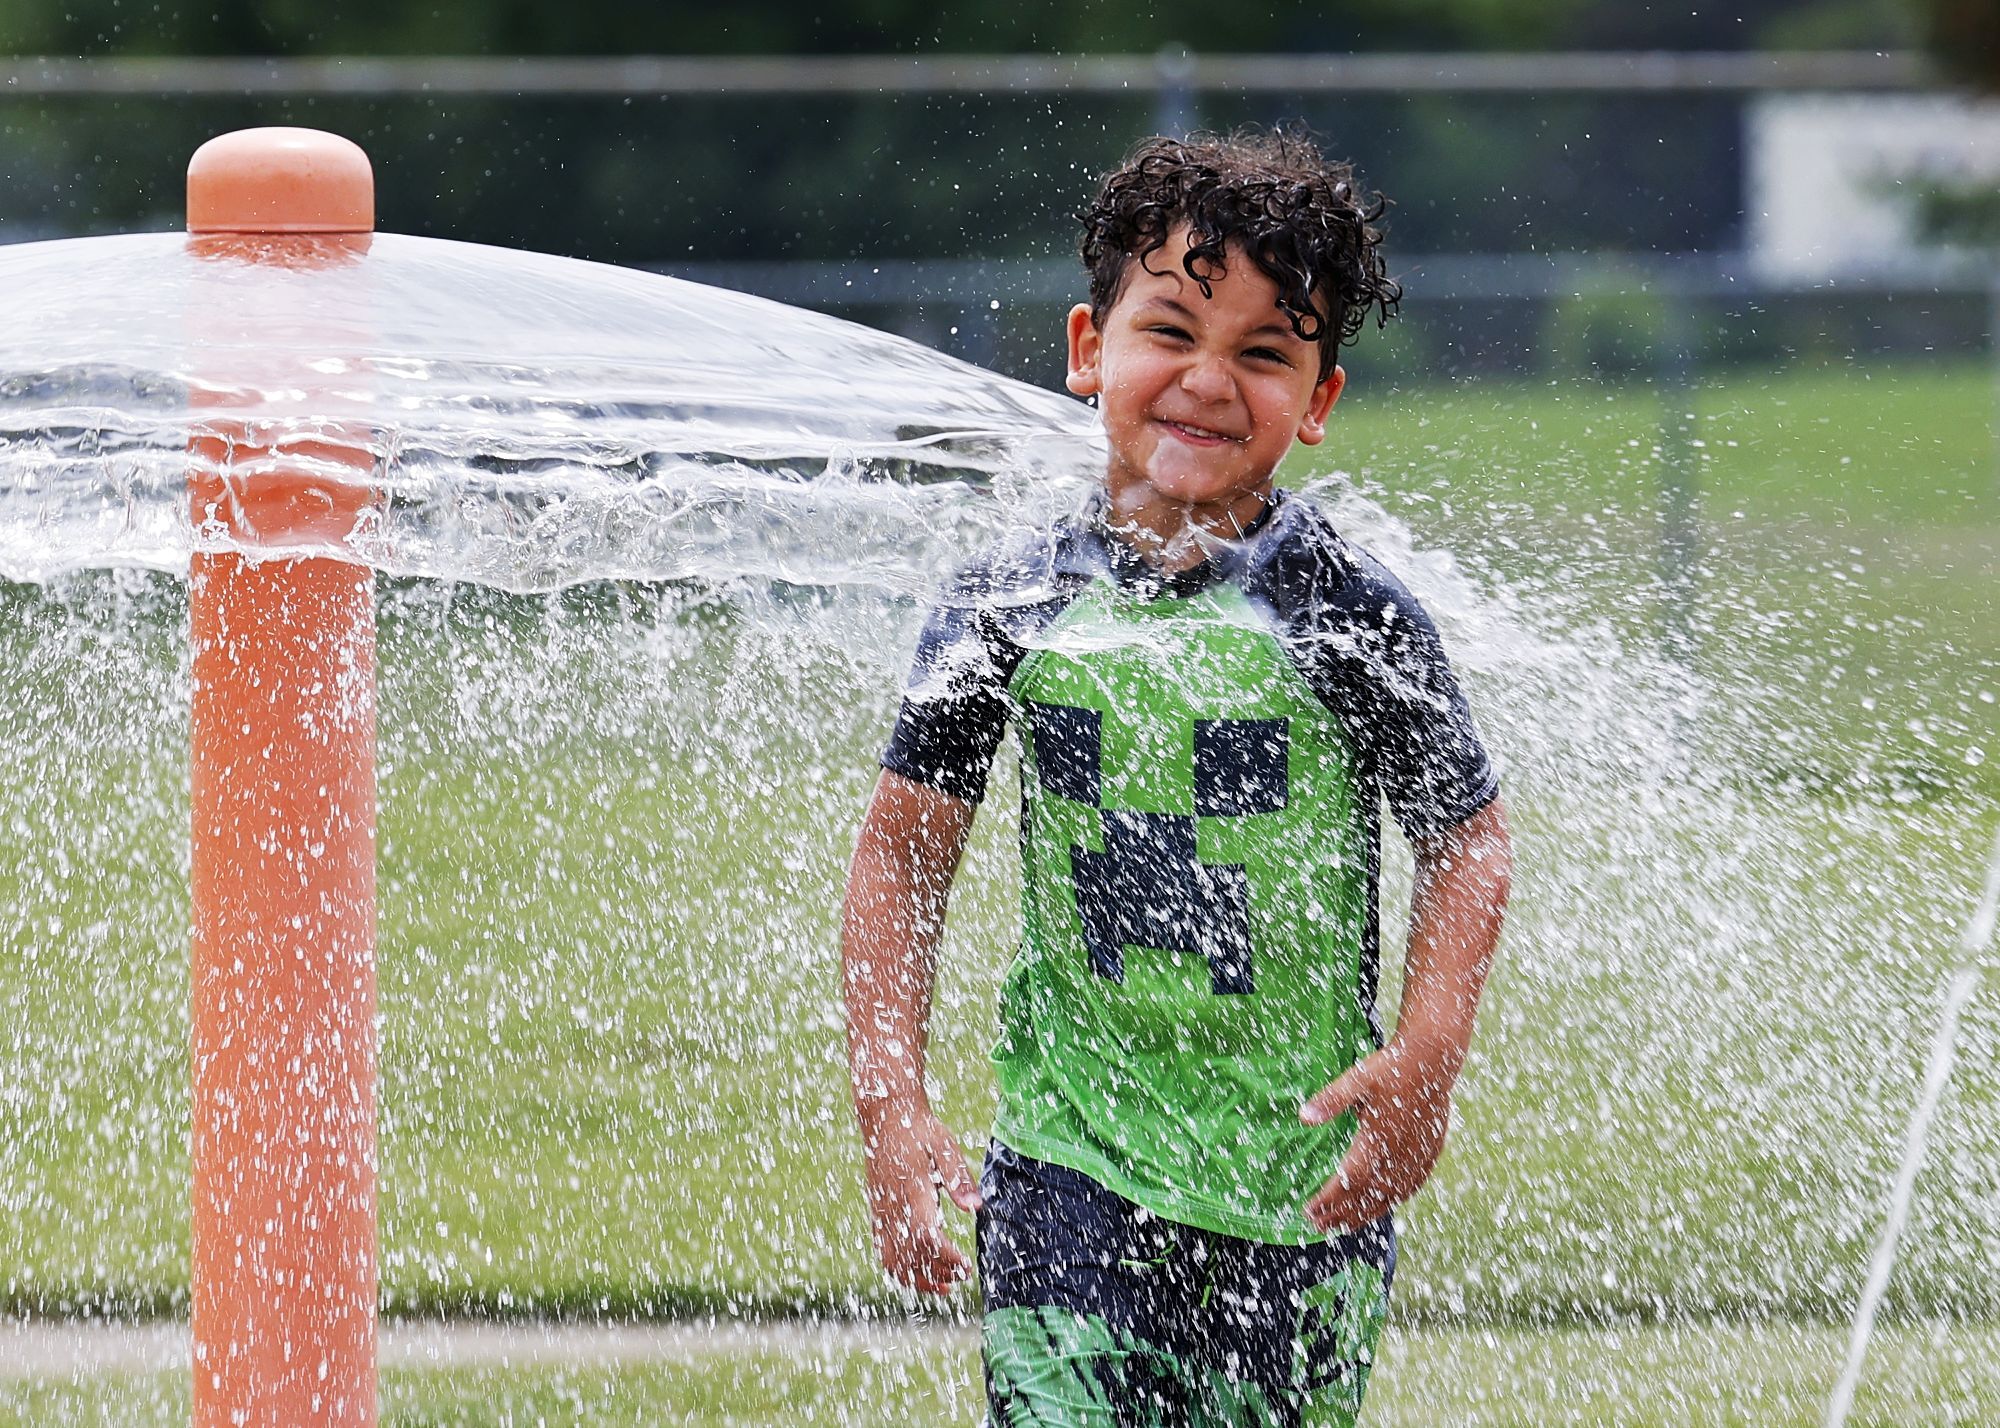 Ian Bailey, 4, cools off in the water at the Booker T. Washington Community Center irrigation area Monday, June 13, 2022, in Hamilton.  NICK GRAHAM/STAFF